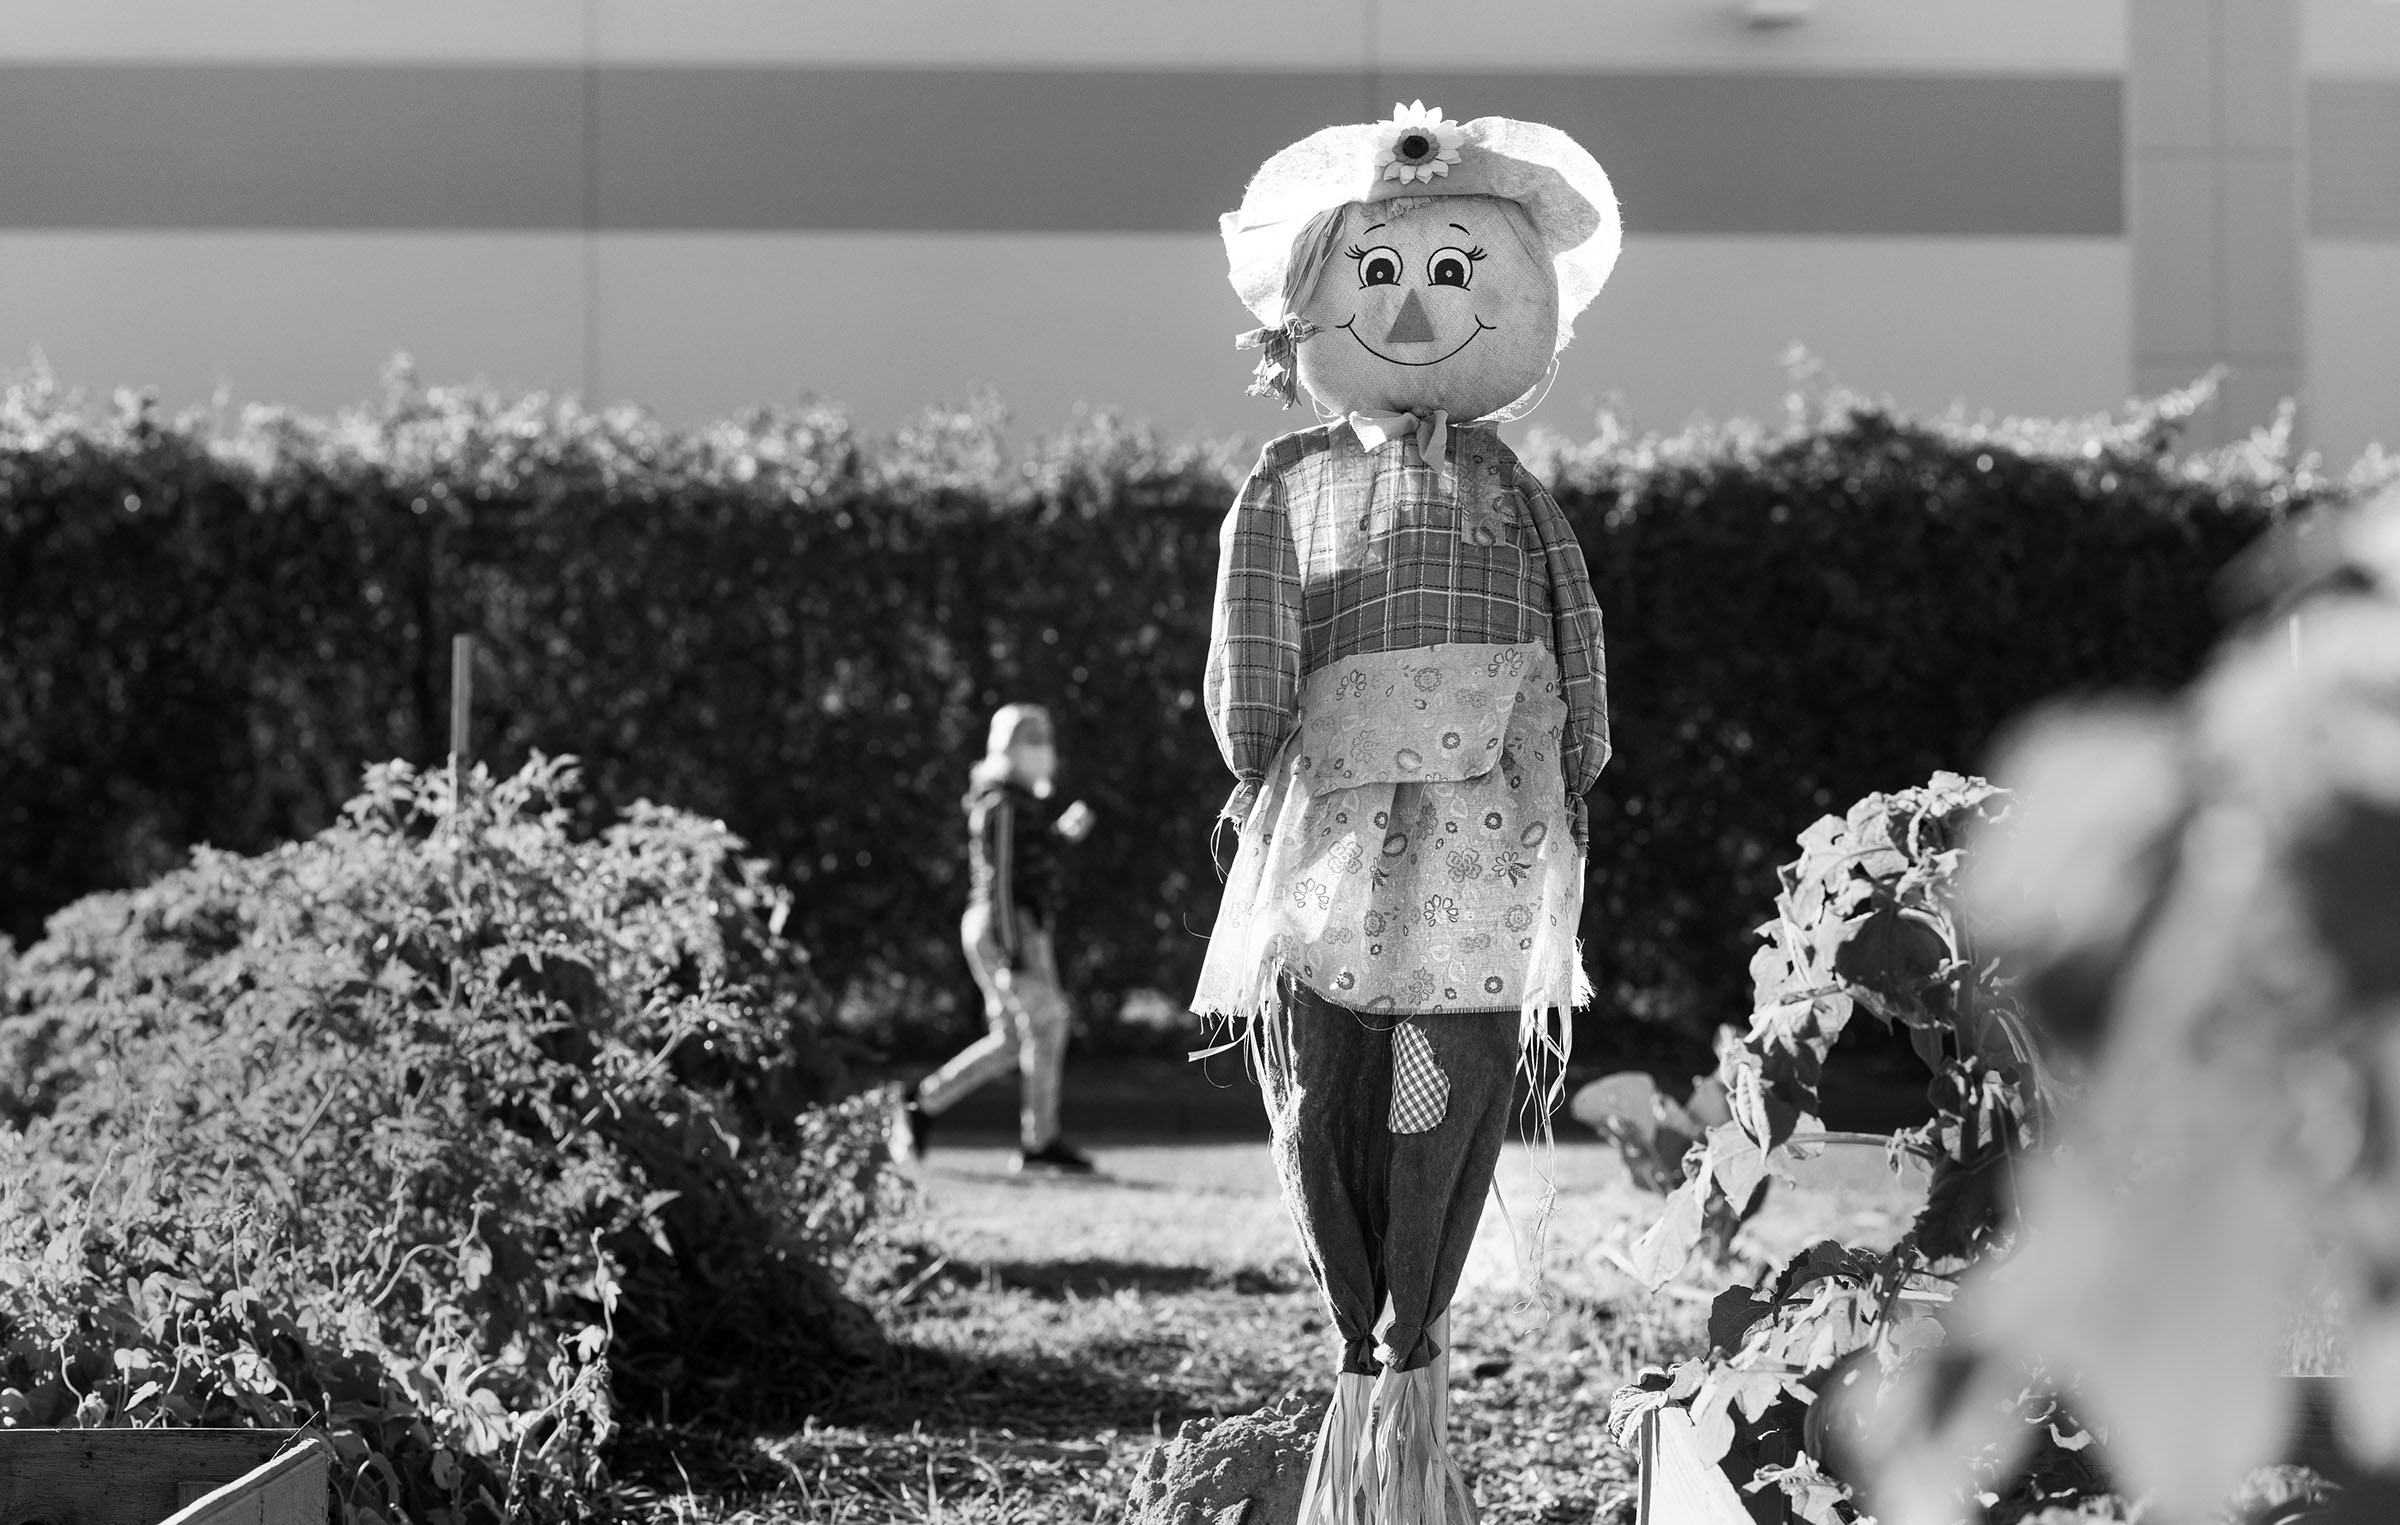 Community Garden participants decorated a scarecrow placed between plots used to keep birds away from their gardens.